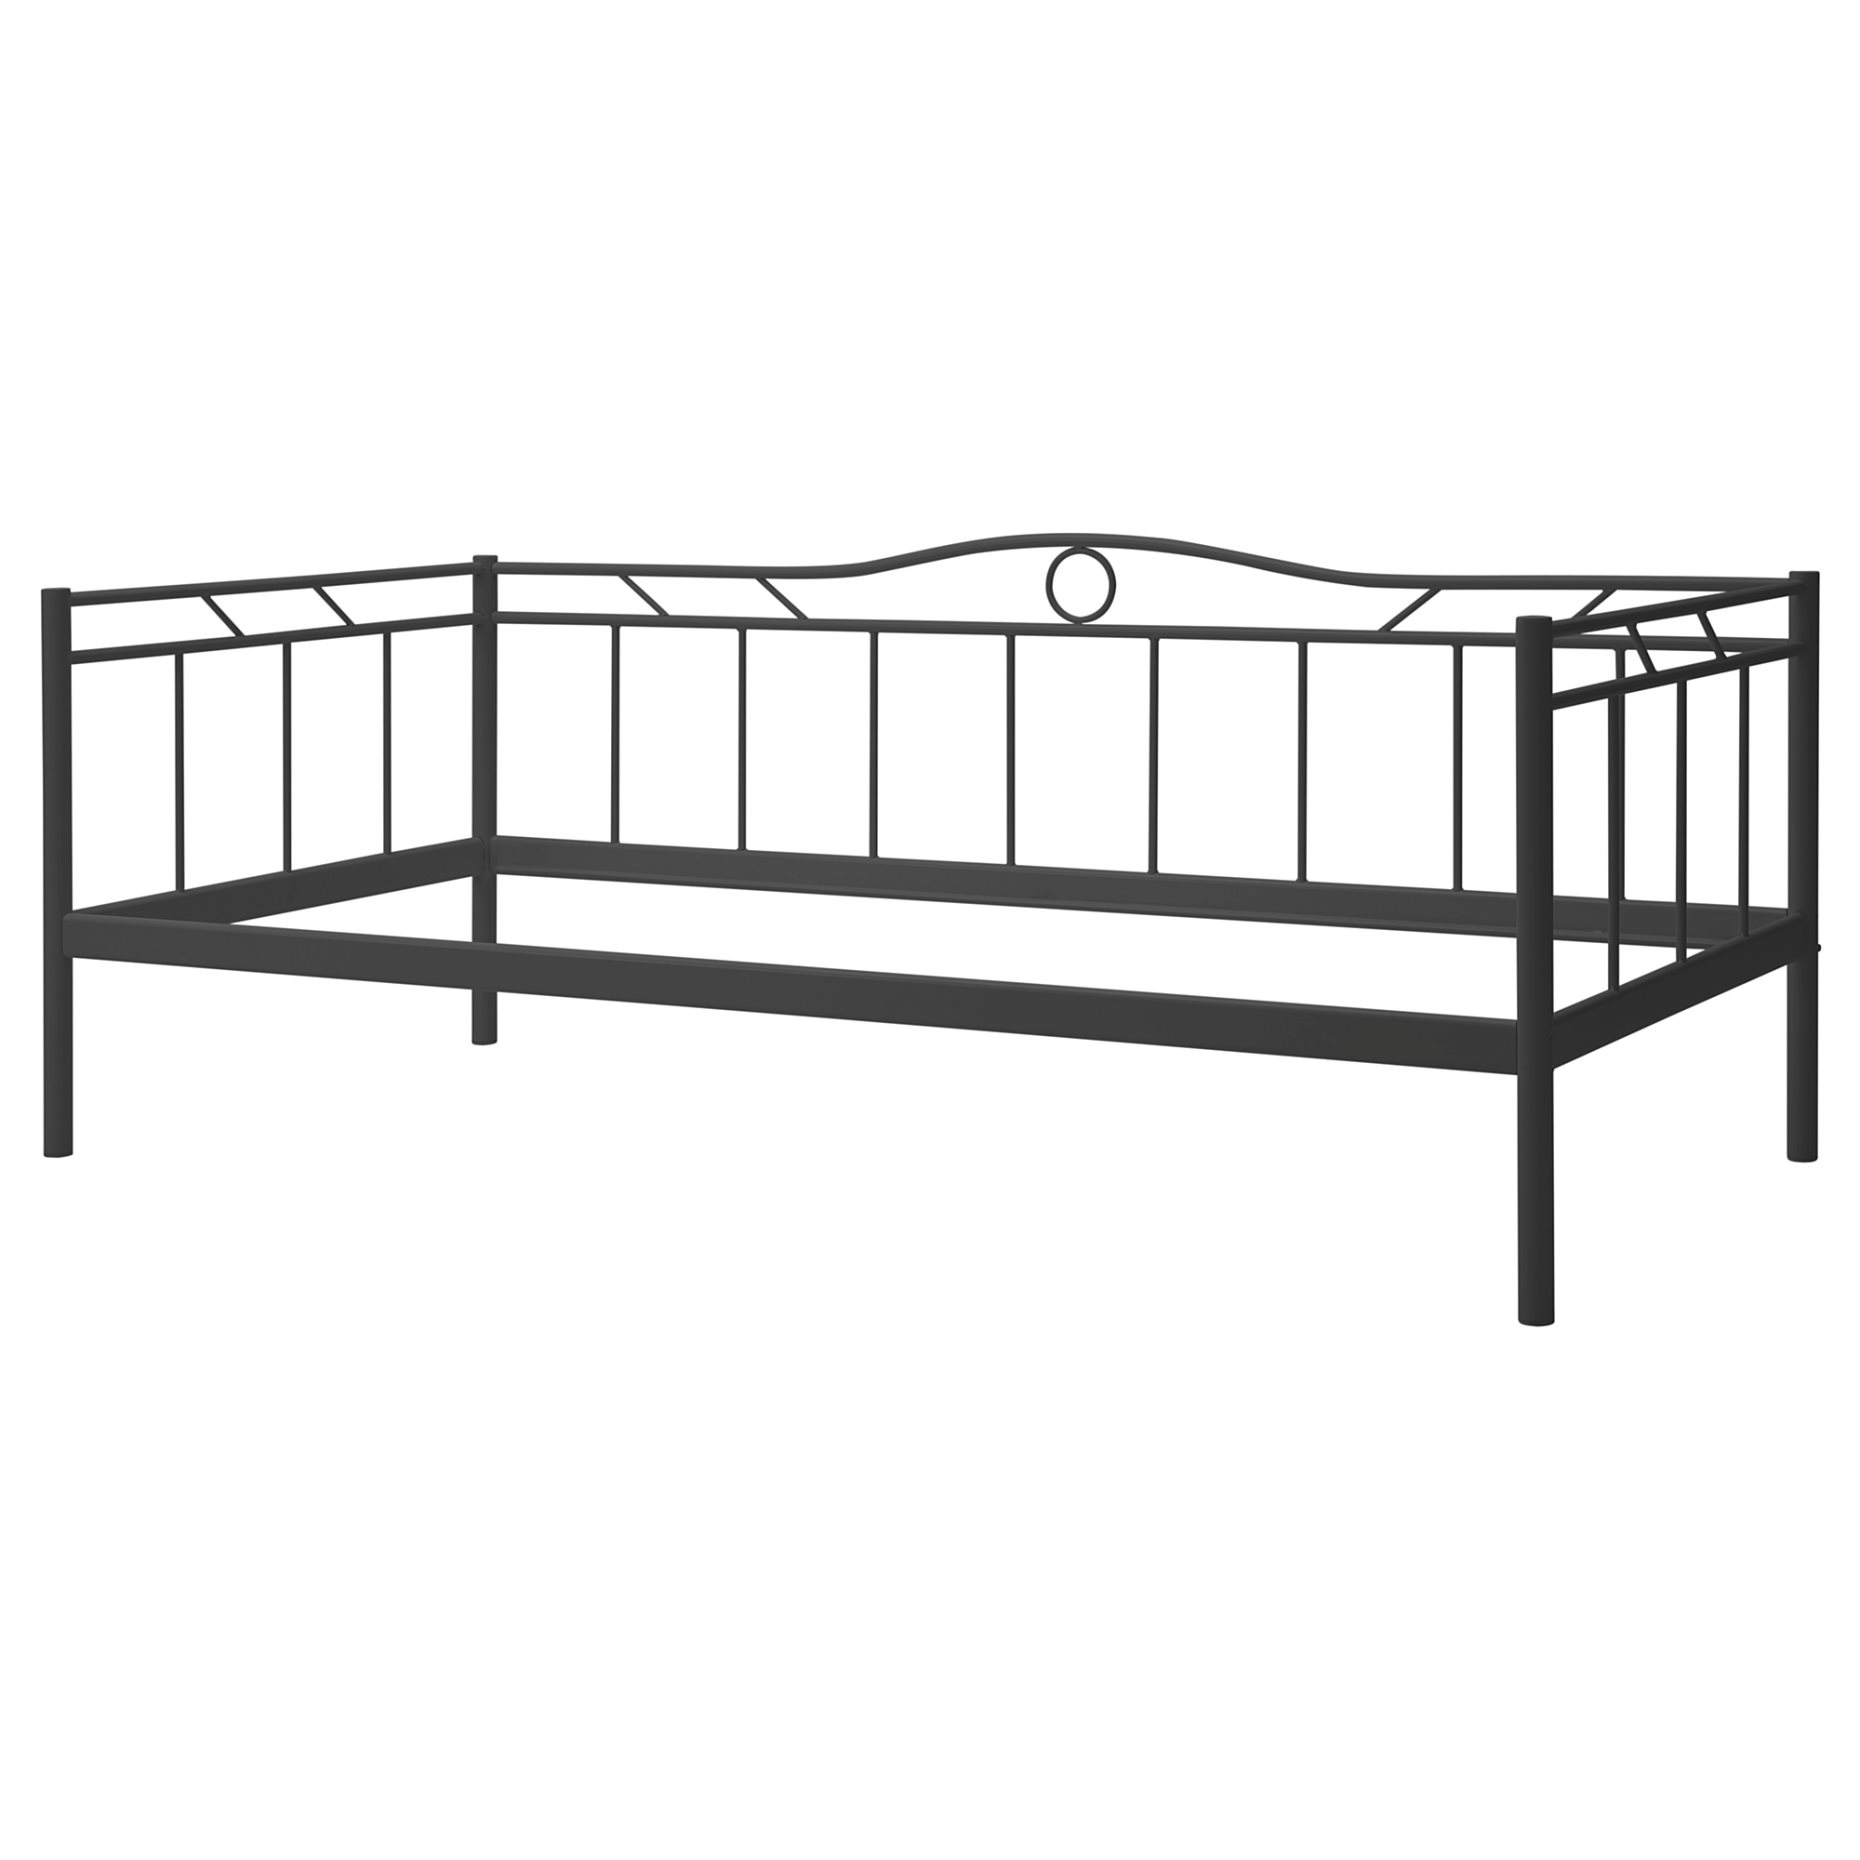 RAMSTA, day-bed, 204.363.41